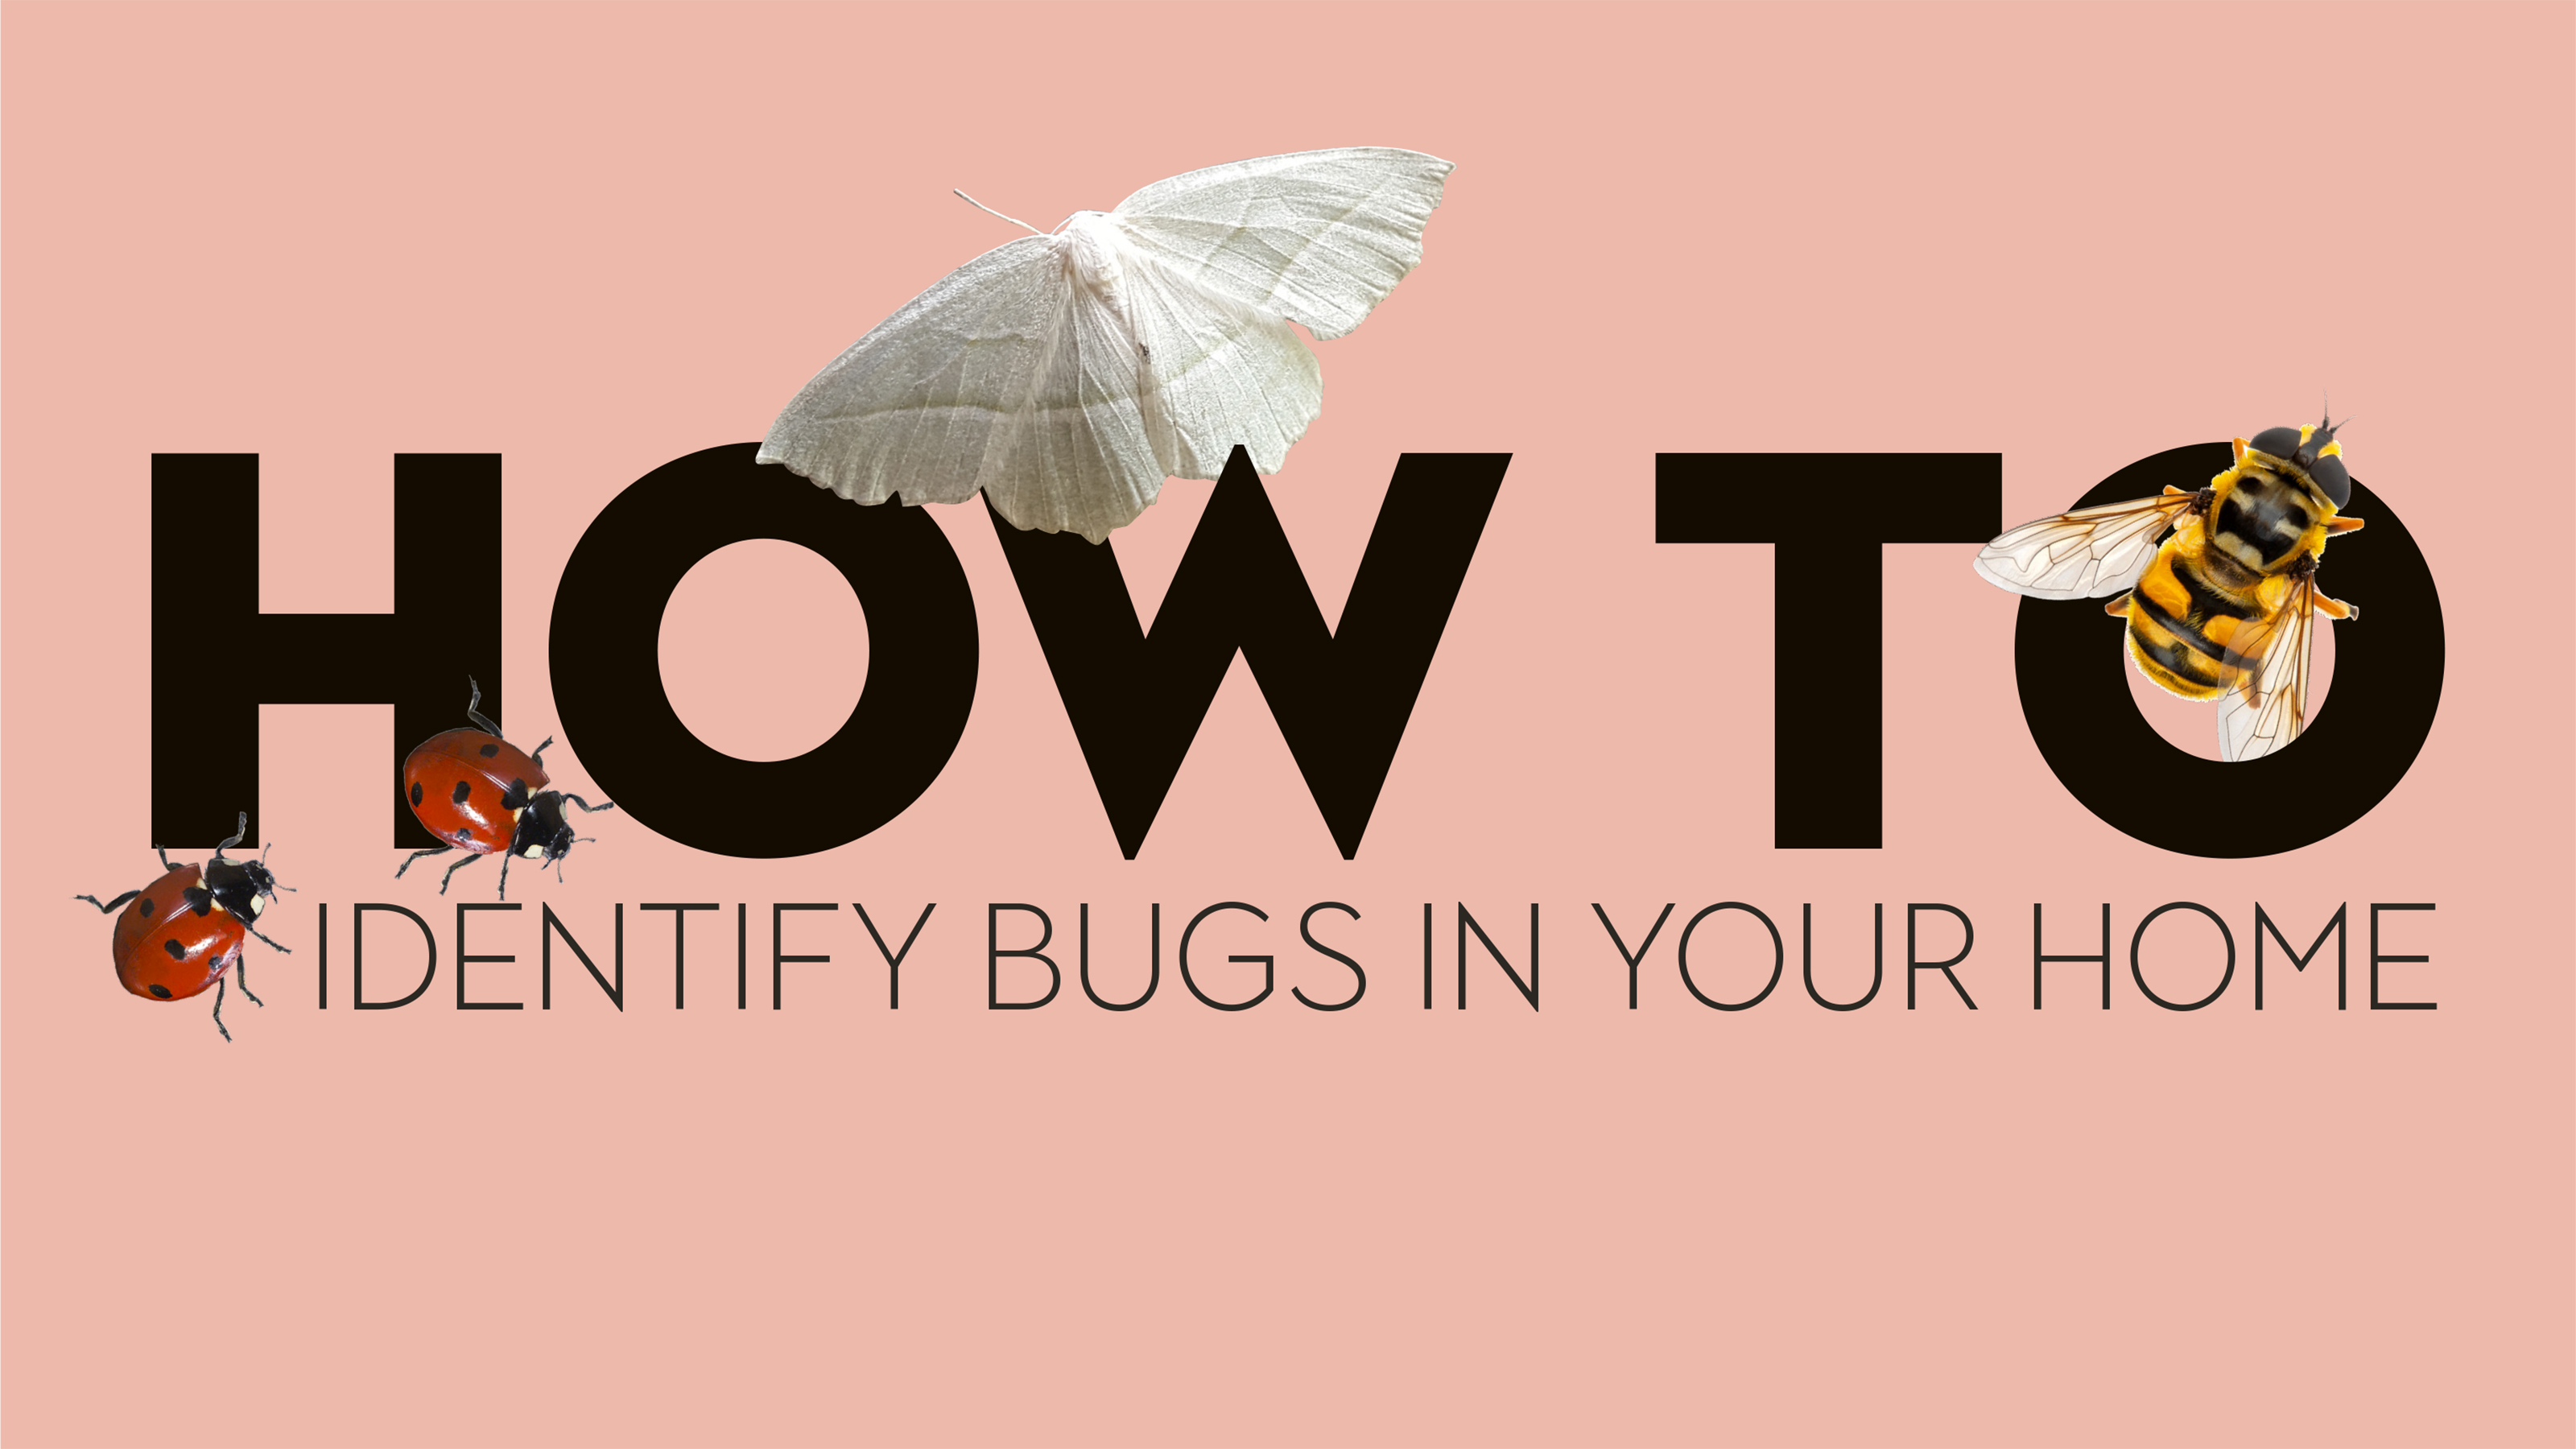 How to identify bugs in your home: spot bed bugs, termites and more with  ease | Real Homes